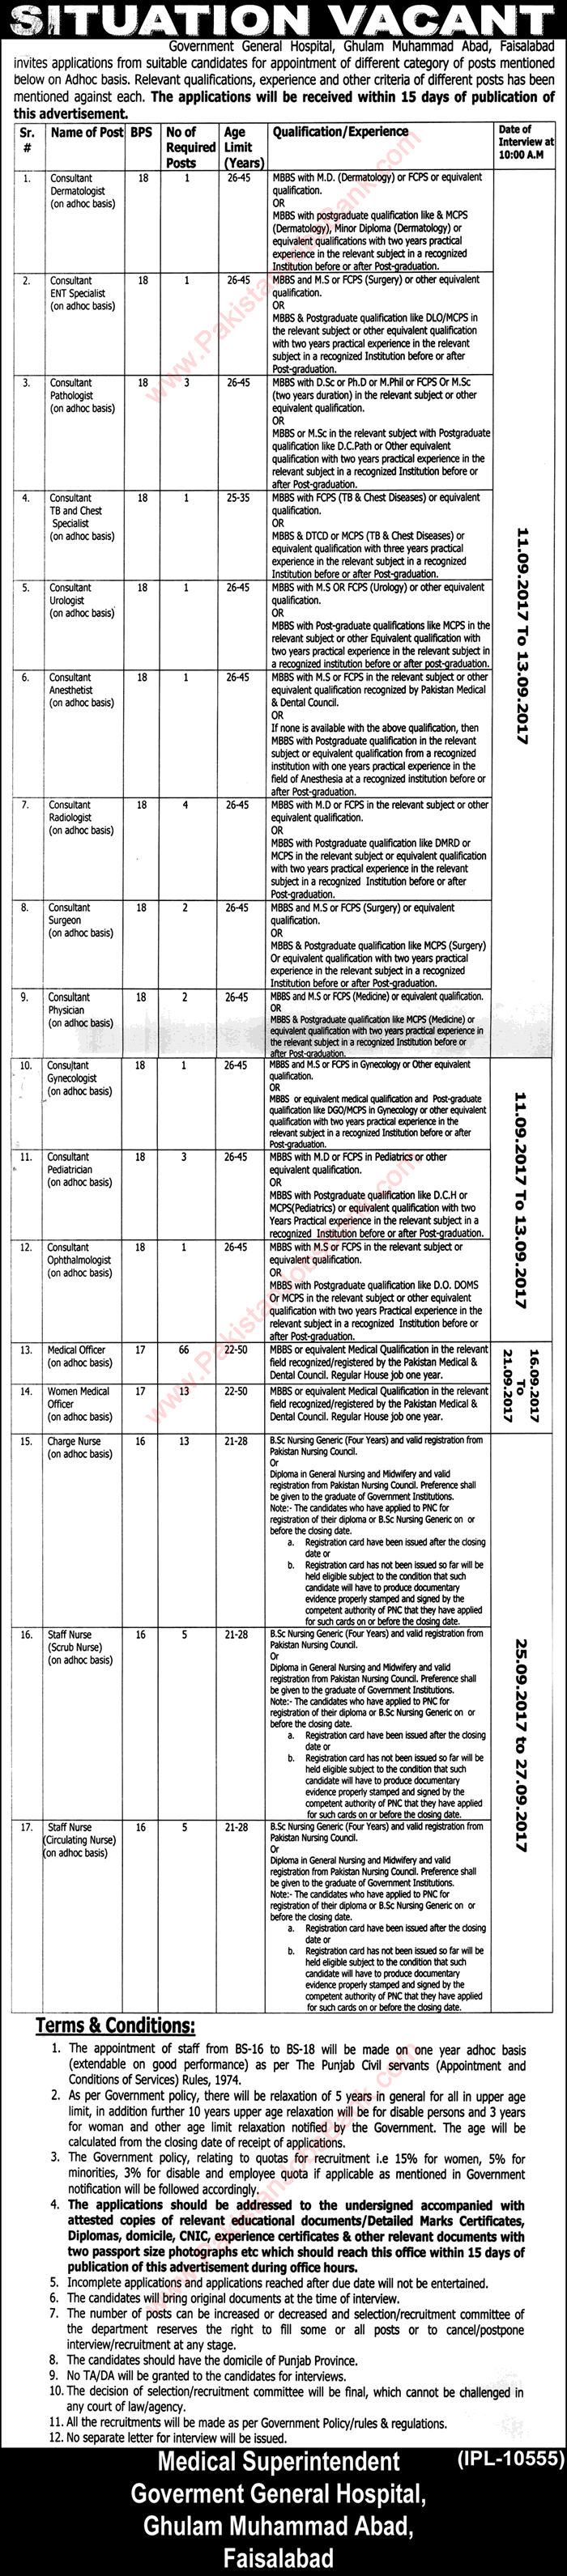 Government General Hospital Faisalabad Jobs August 2017 Medical Officers, Consultants & Nurses Latest